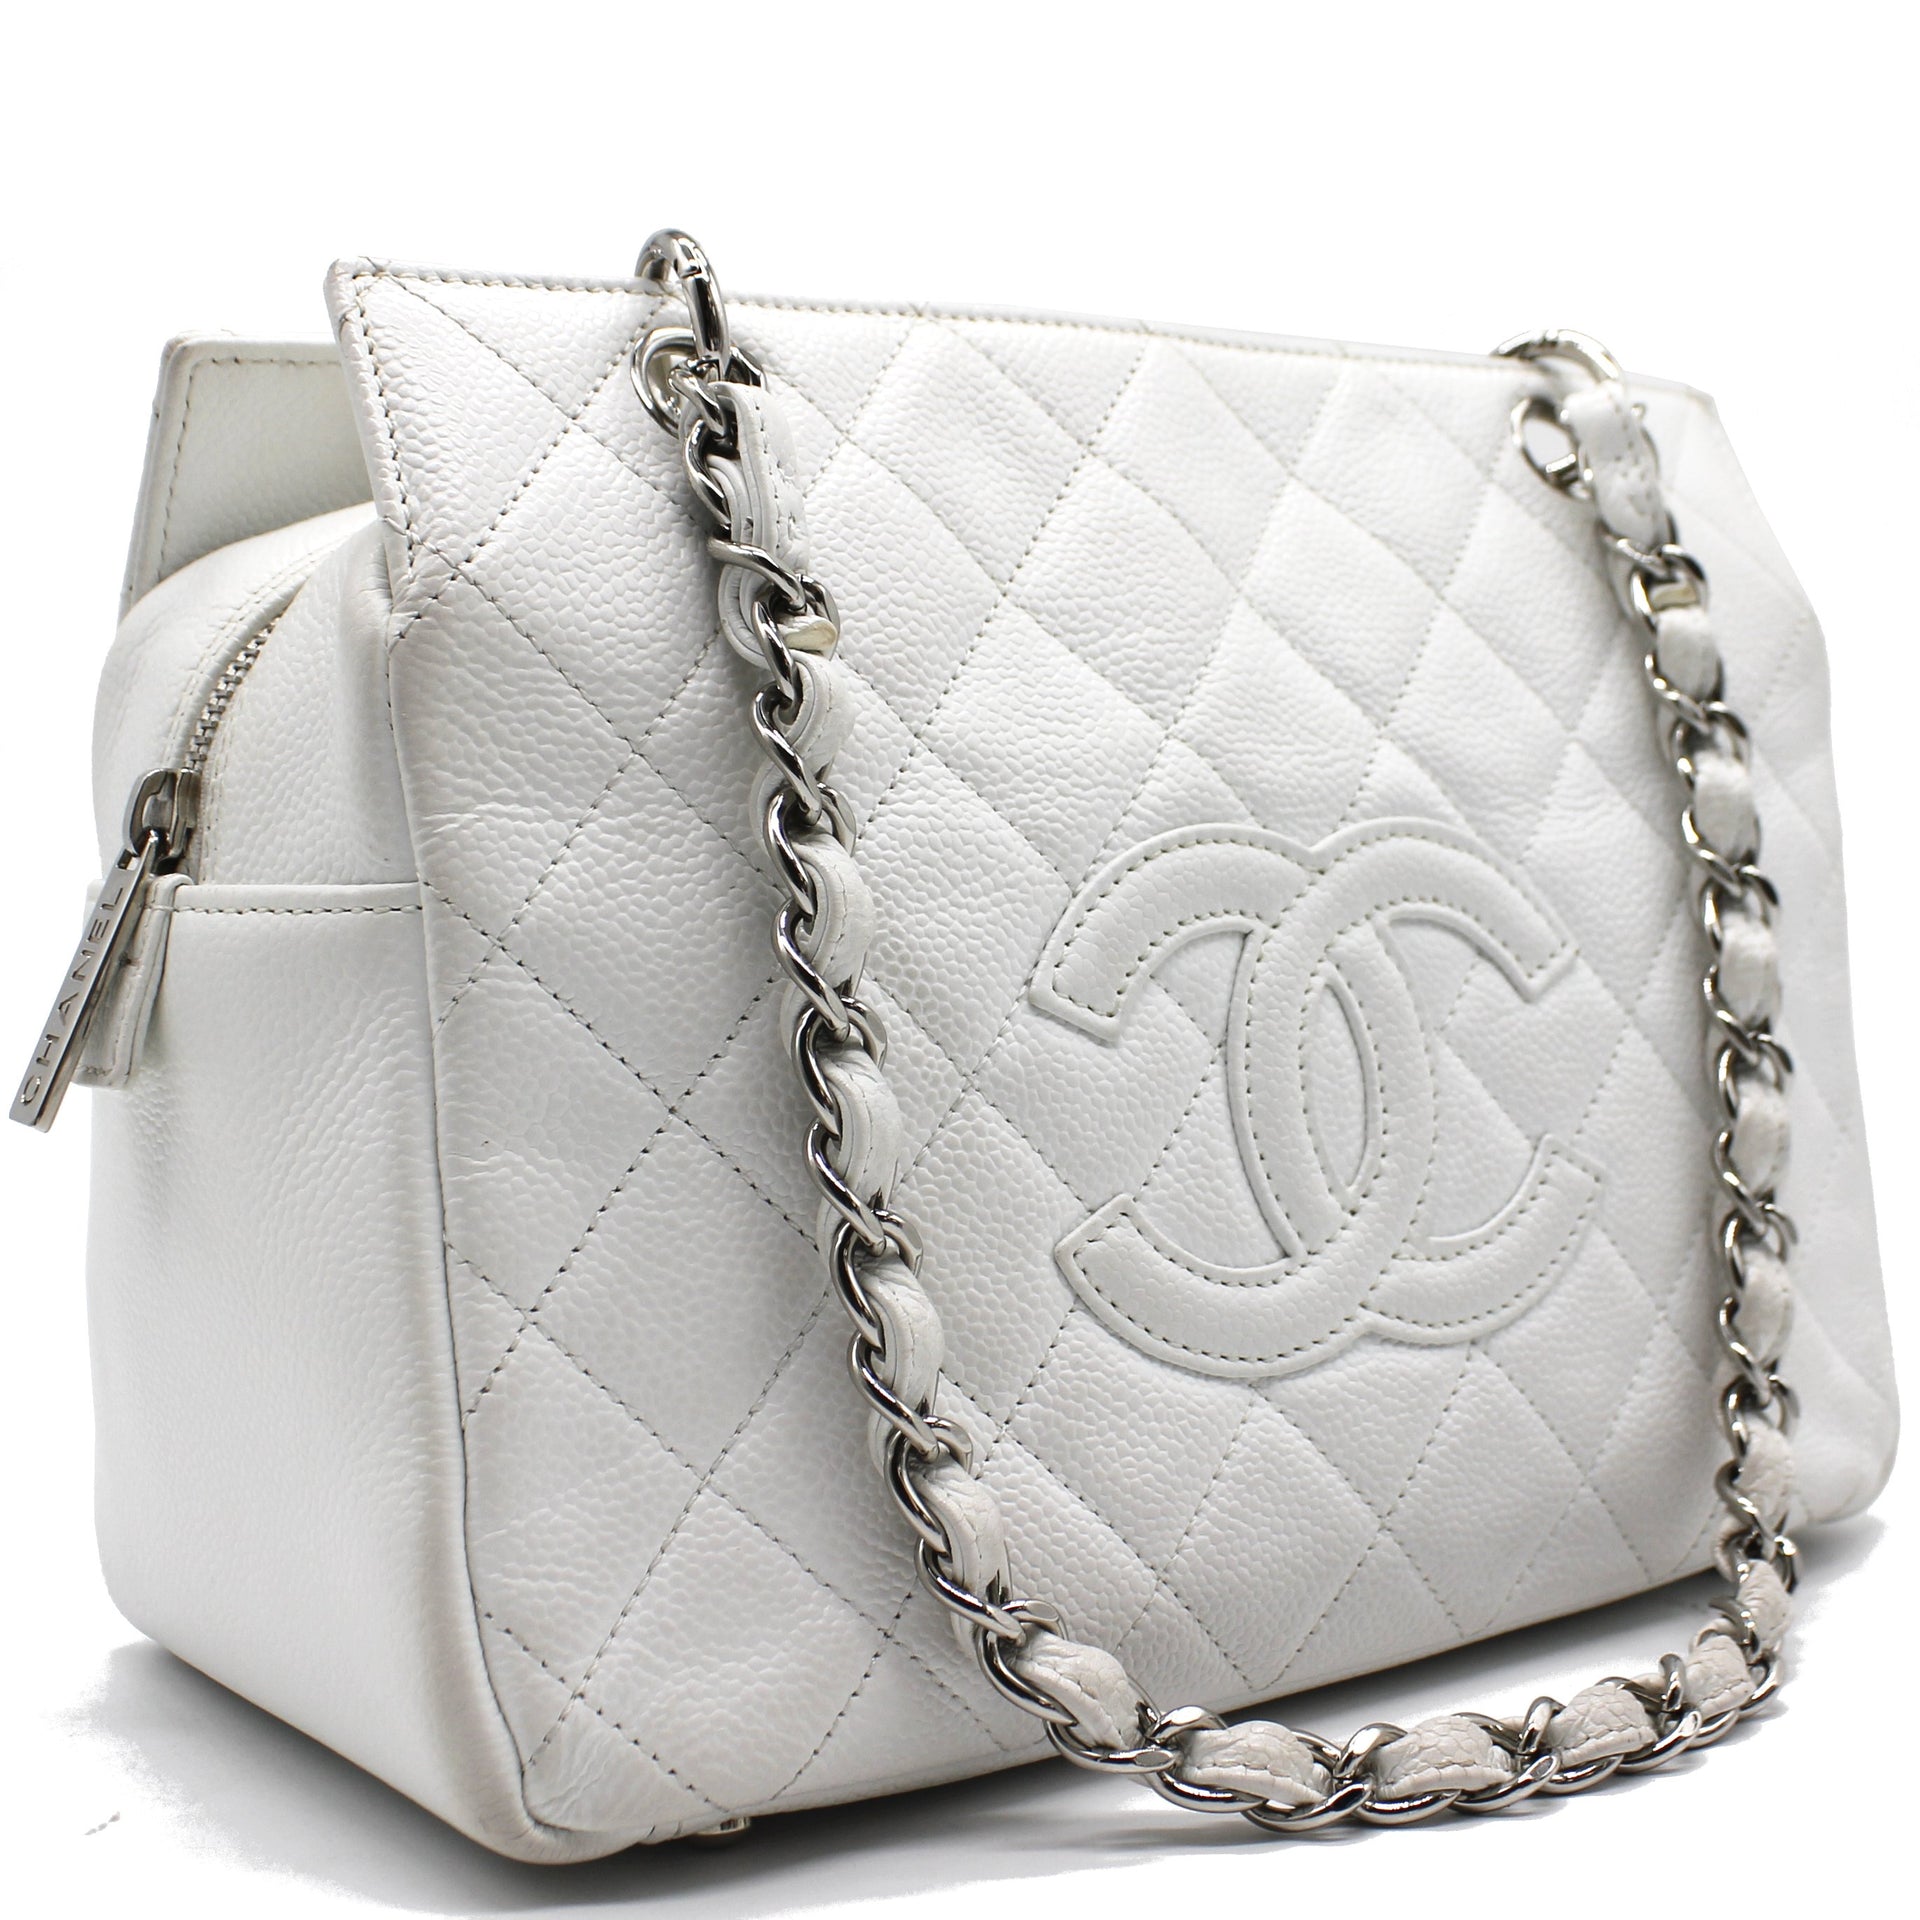 Chanel Chanel Other Shopping Bag second hand prices